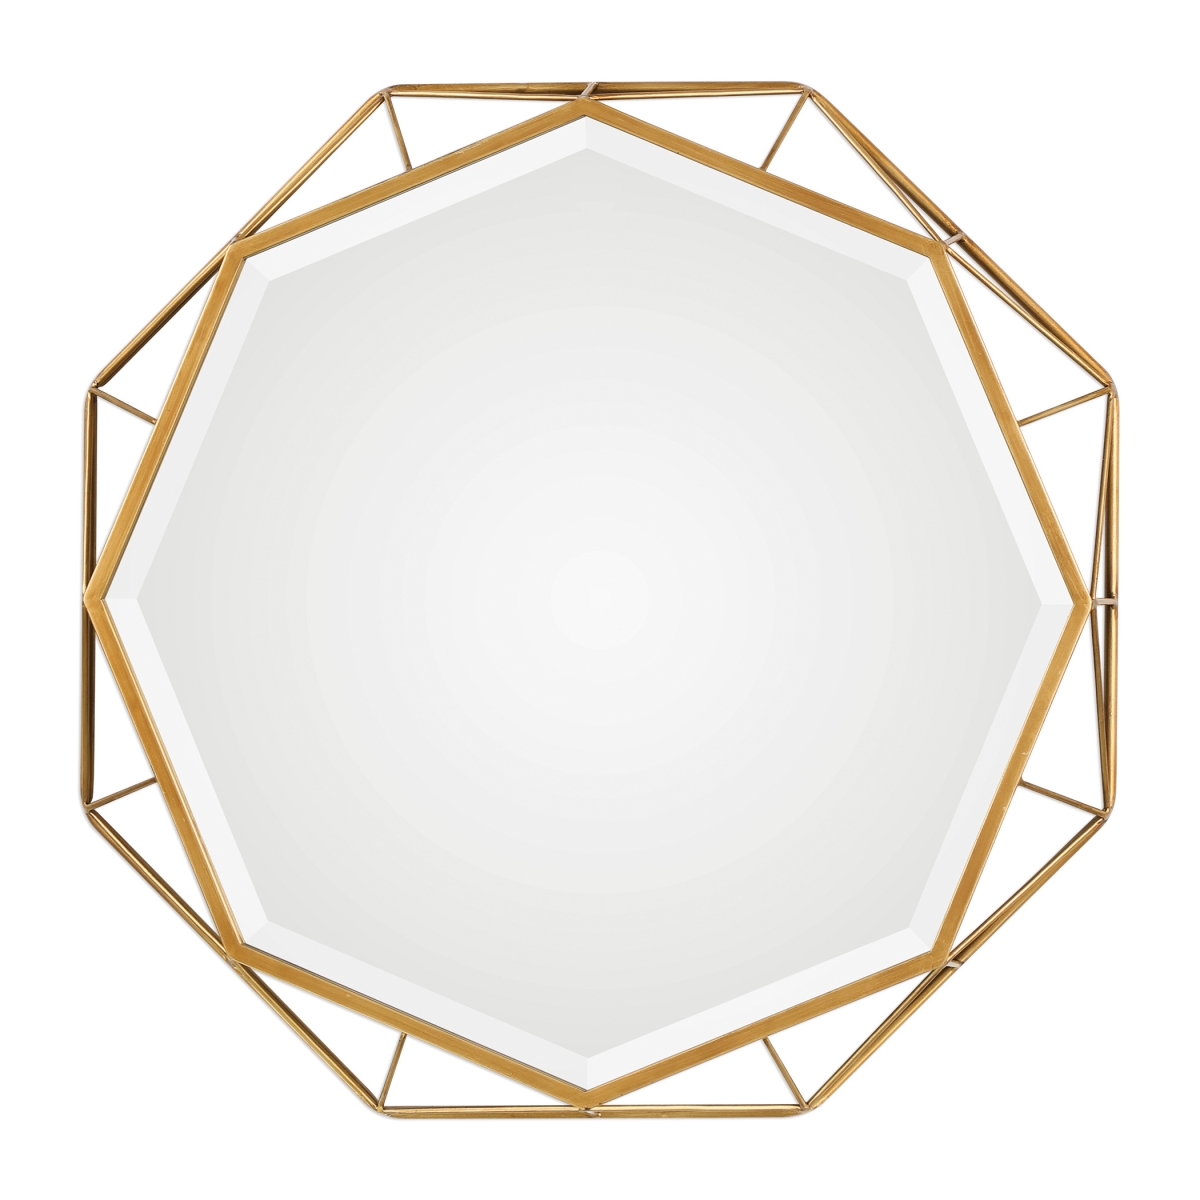 Picture of 212 Main 09317 Mekhi Antiqued Gold Mirror